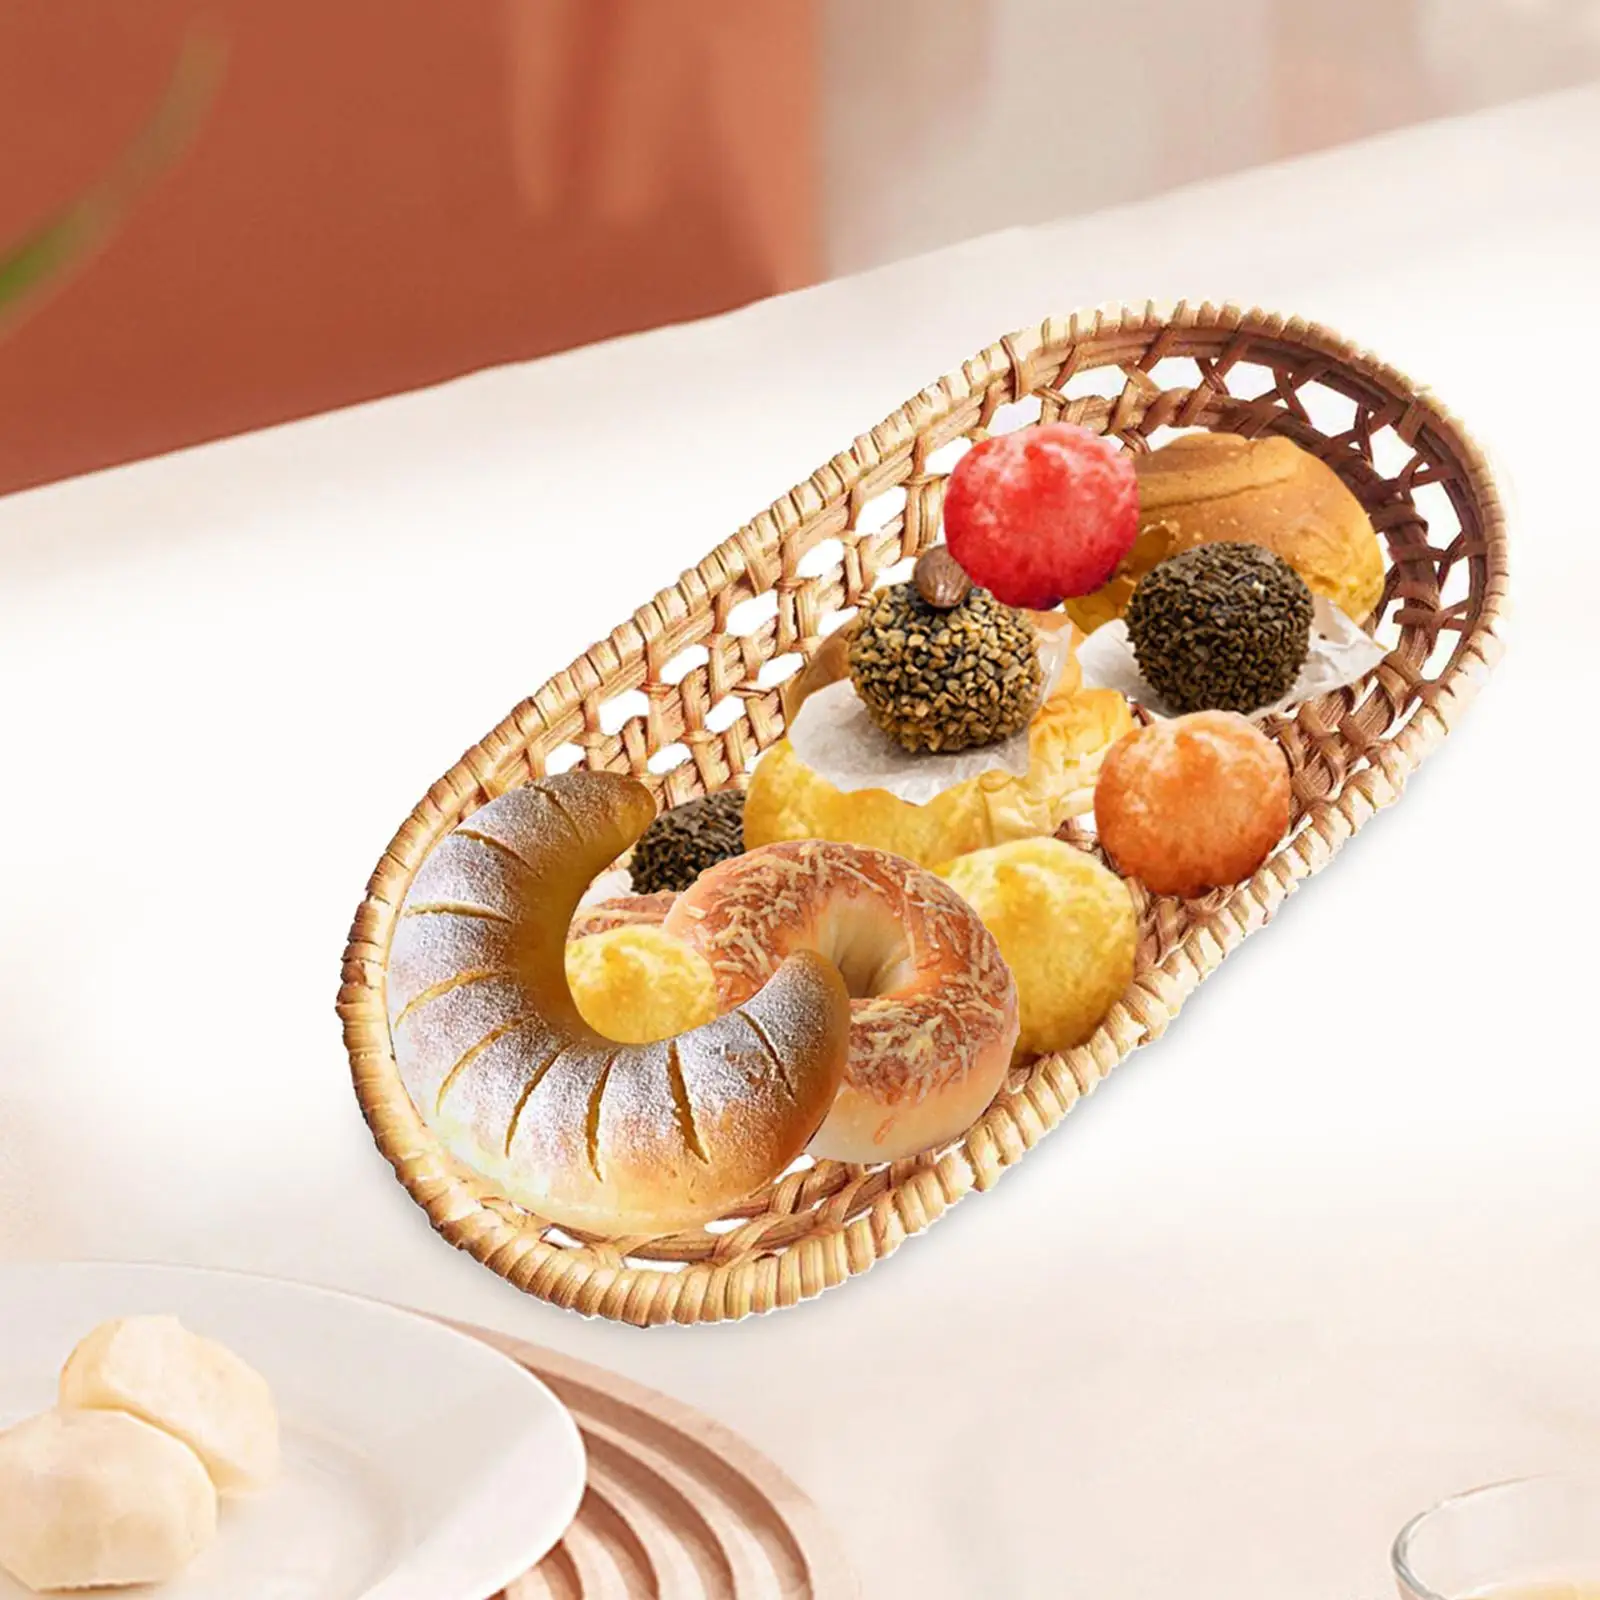 Rattan Baskets Organizer Tabletop Food Serving Tray Wicker Woven Basket for Fruits Breakfast Vegetables Outdoor Hotel